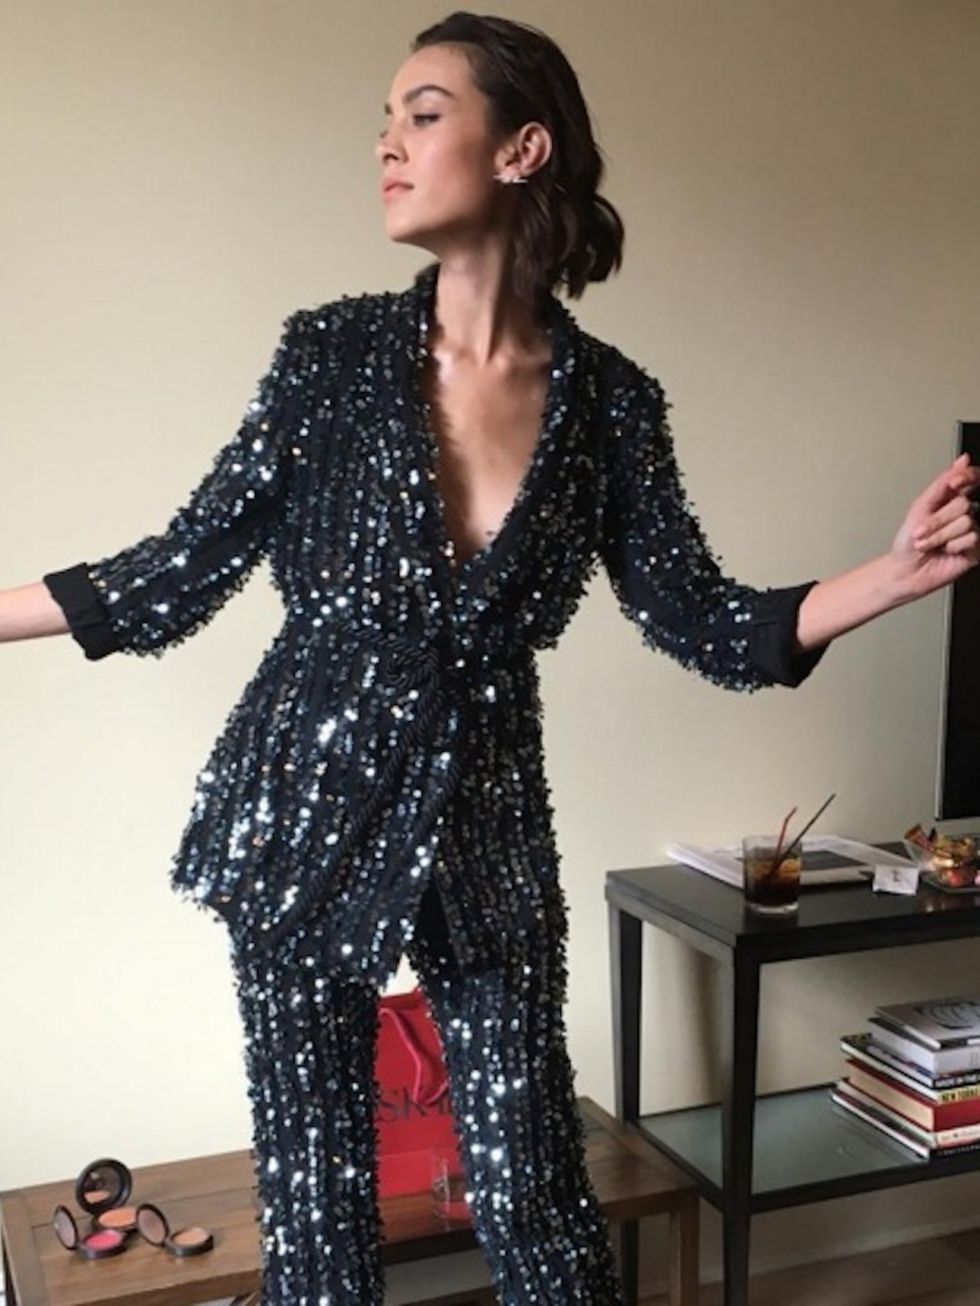 Alexa Chung boogied in her Thakoon suit